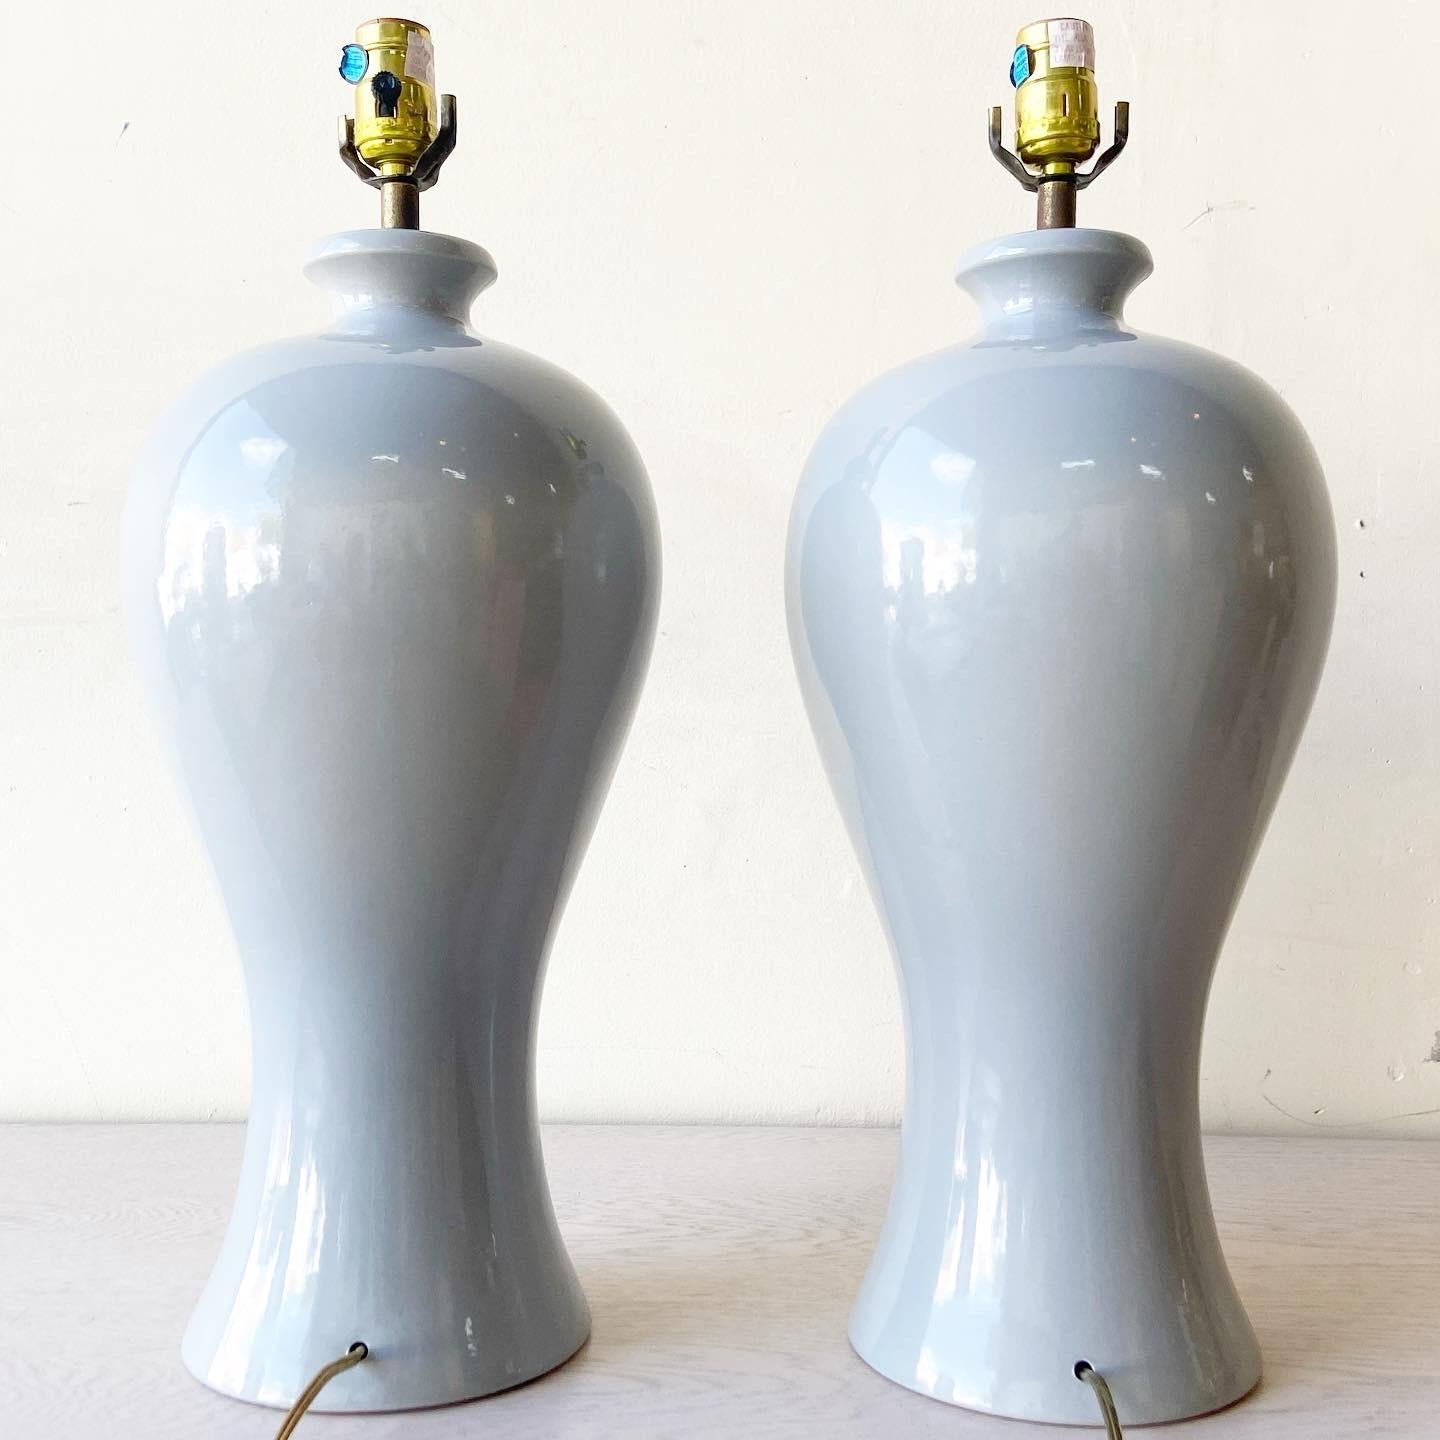 Beautiful pair of grey postmodern 3 way lighting table lamps.

Additional information:
Material: Porcelain
Color: Grey
Style: Postmodern
Time Period: 1980s
Dimension: 9